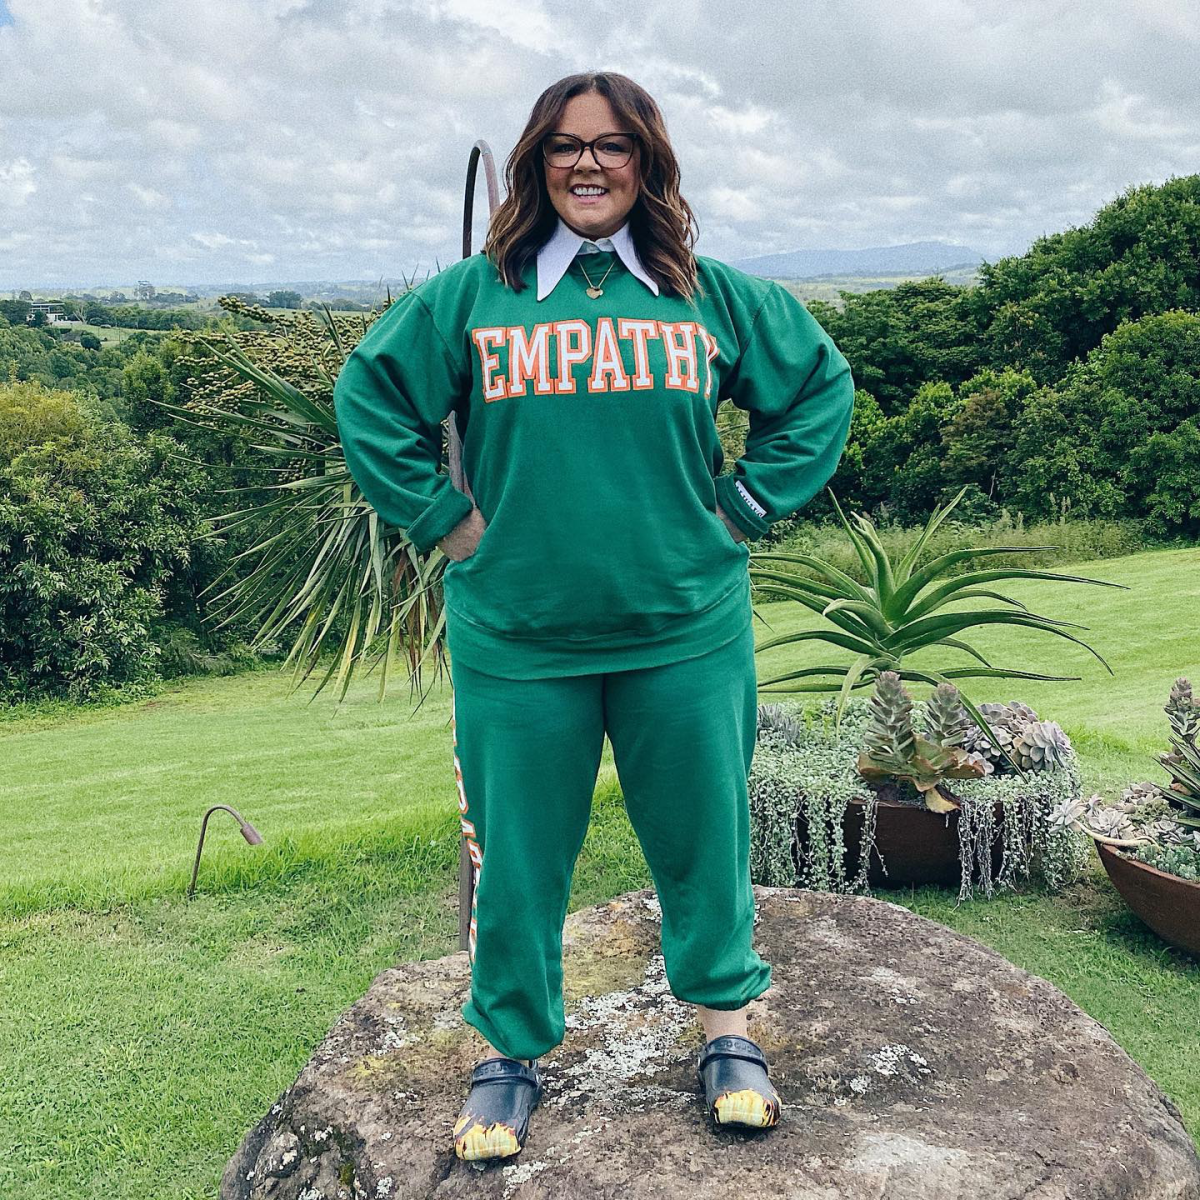 melissa mccarthy in empathy tracksuit